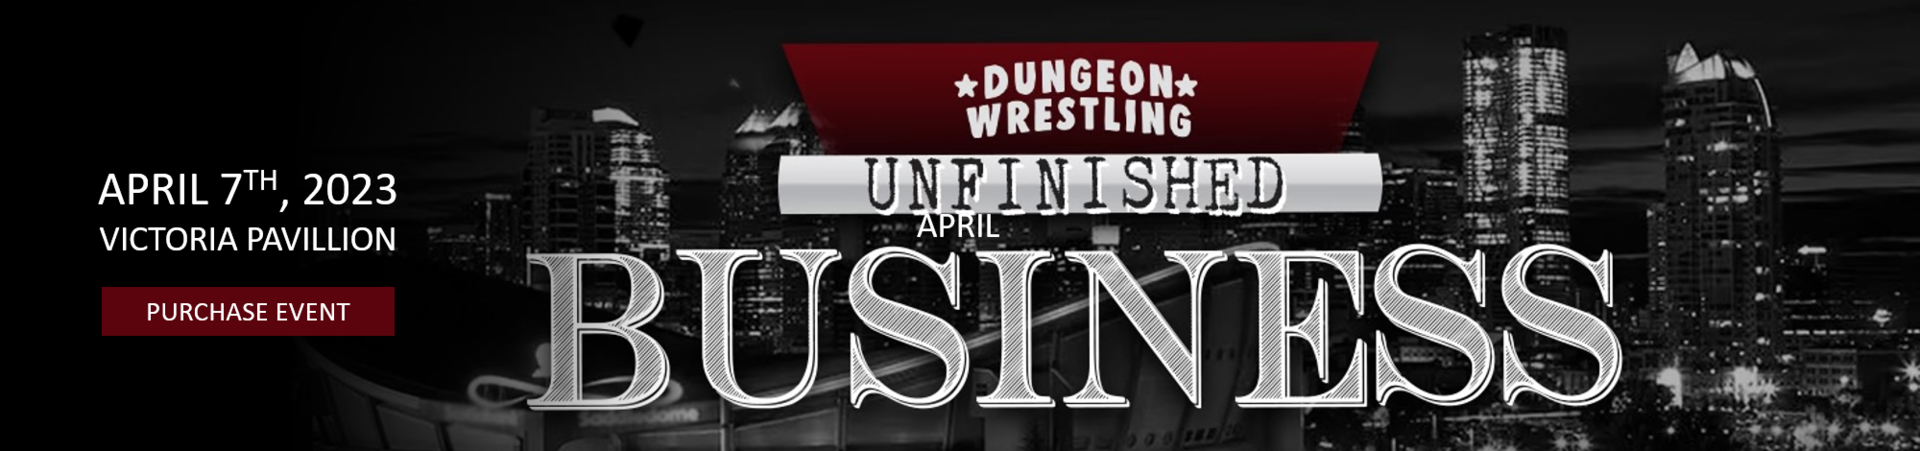 Dungeon Wrestling - Unfinished Business